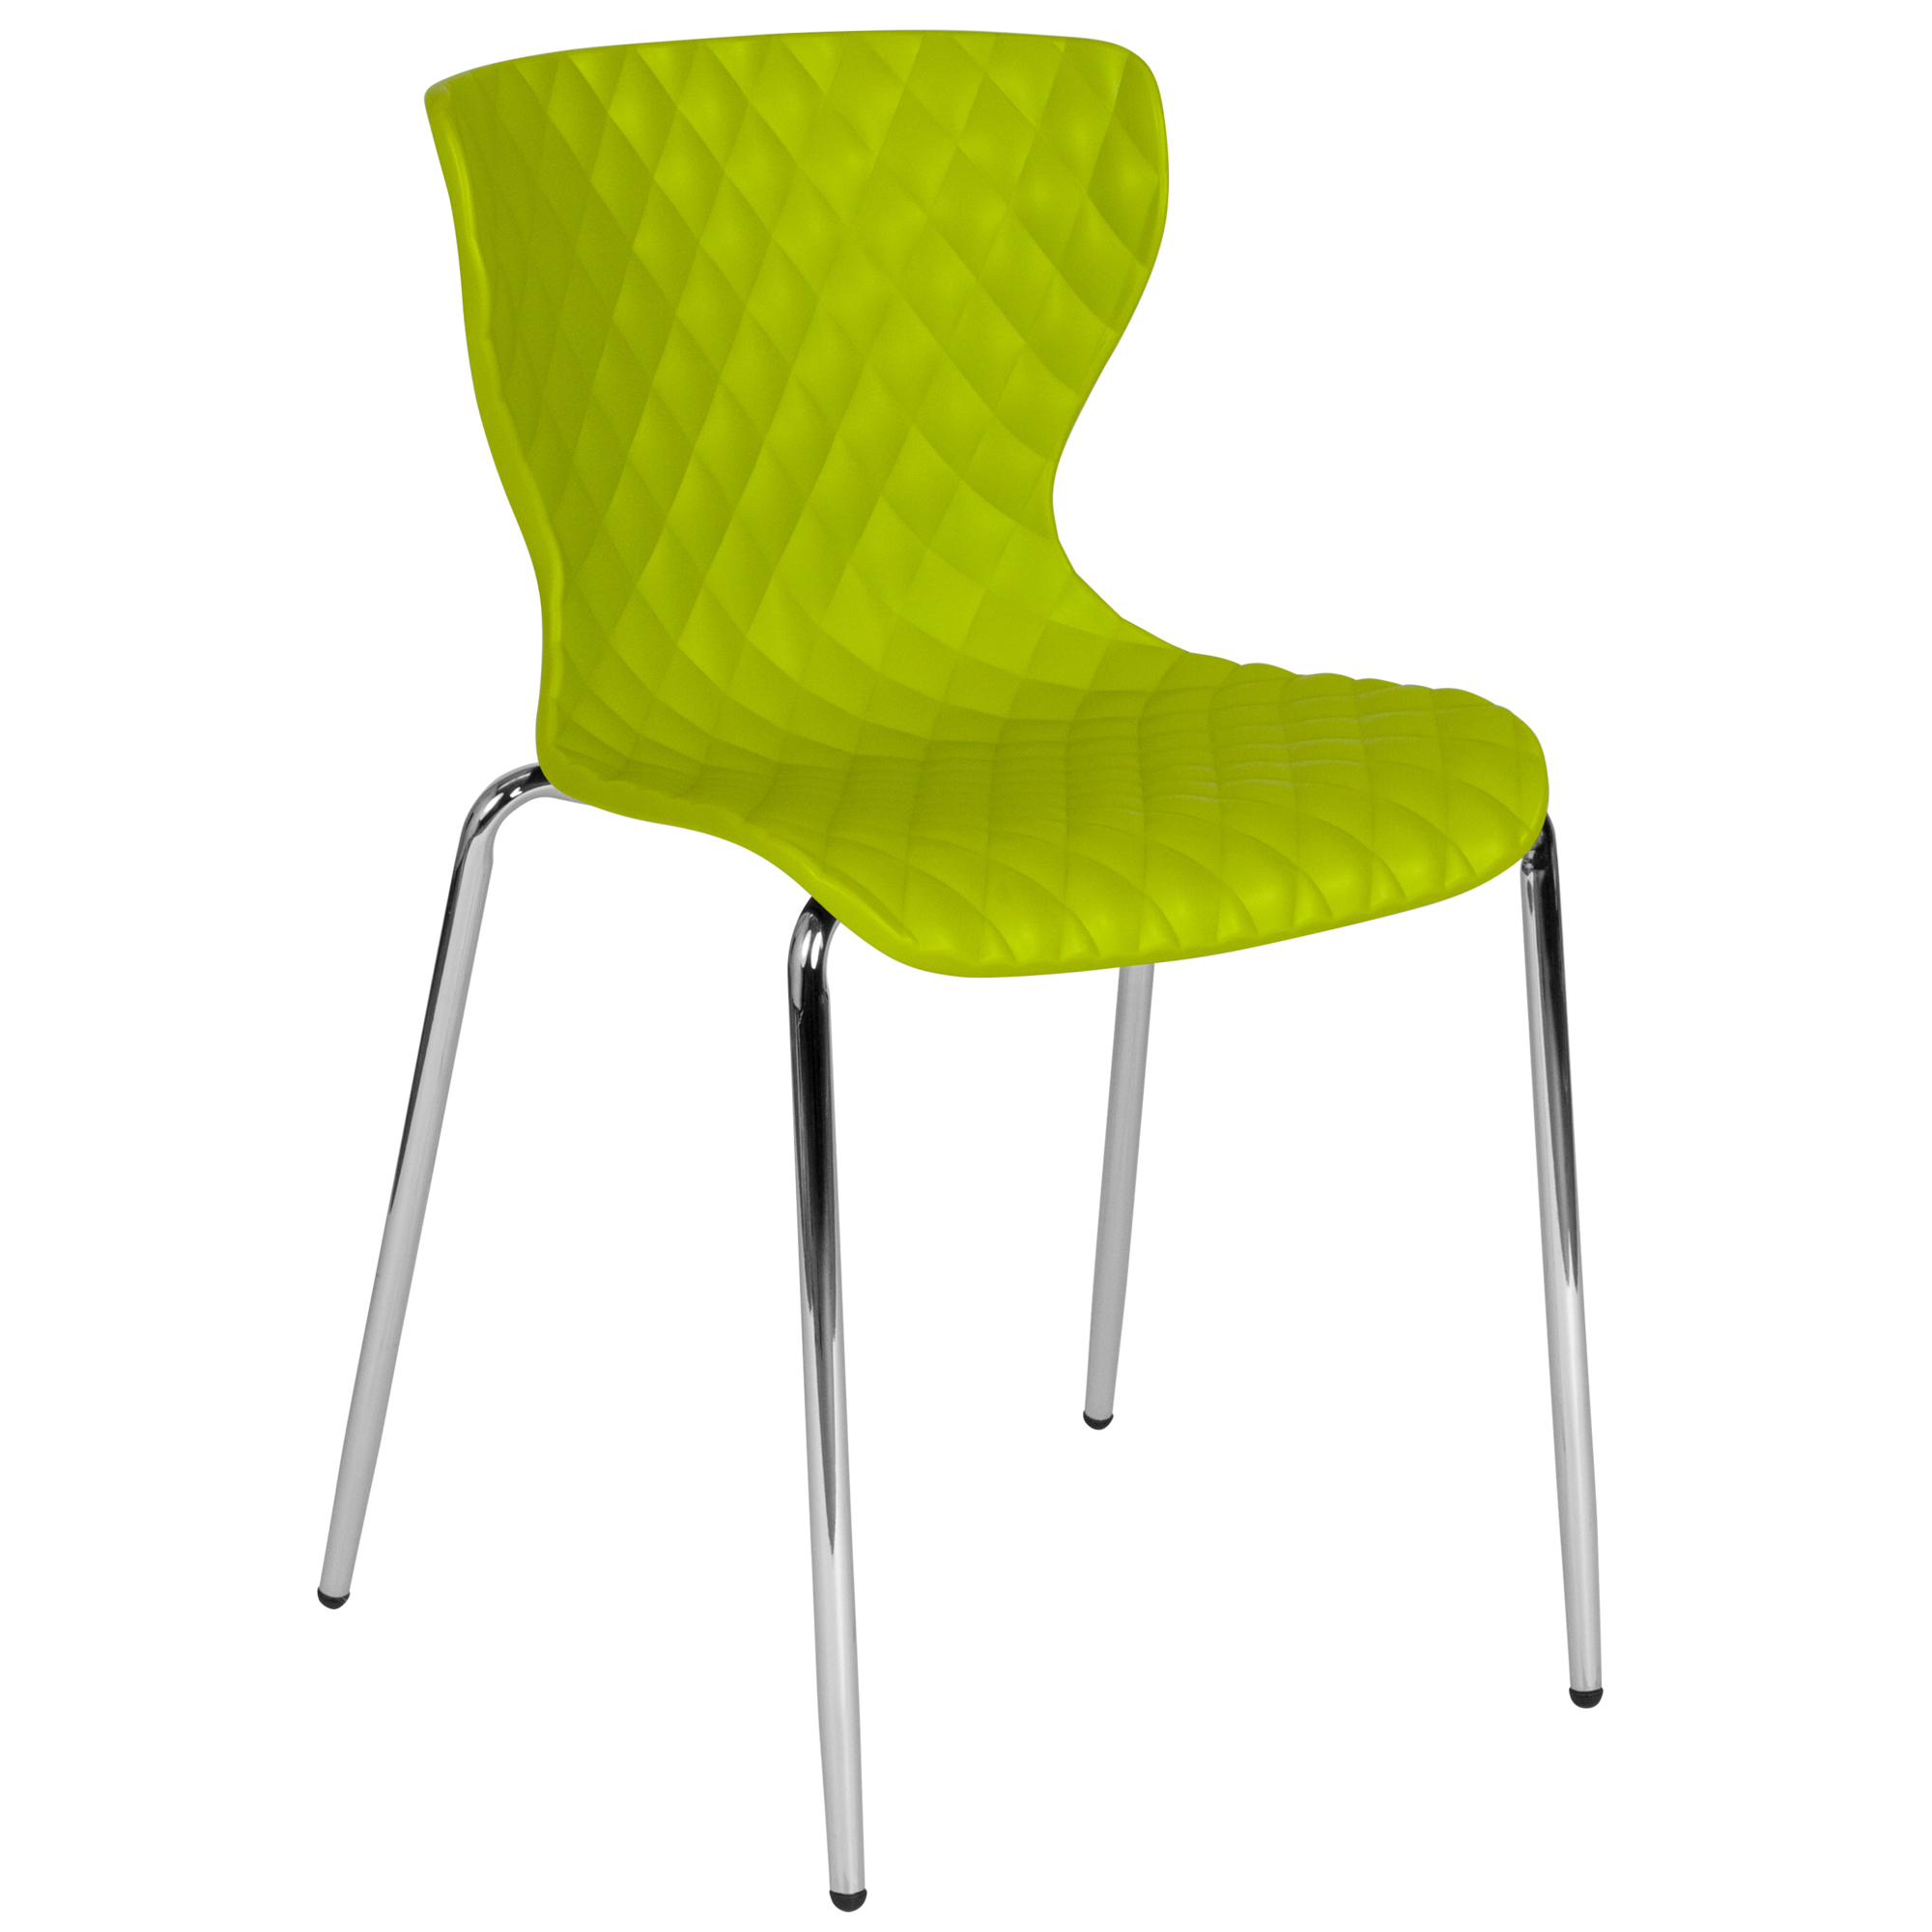 Flash Furniture, Contemporary Citrus Green Plastic Stack Chair, Primary Color Green, Included (qty.) 1, Model LF707CCGRN